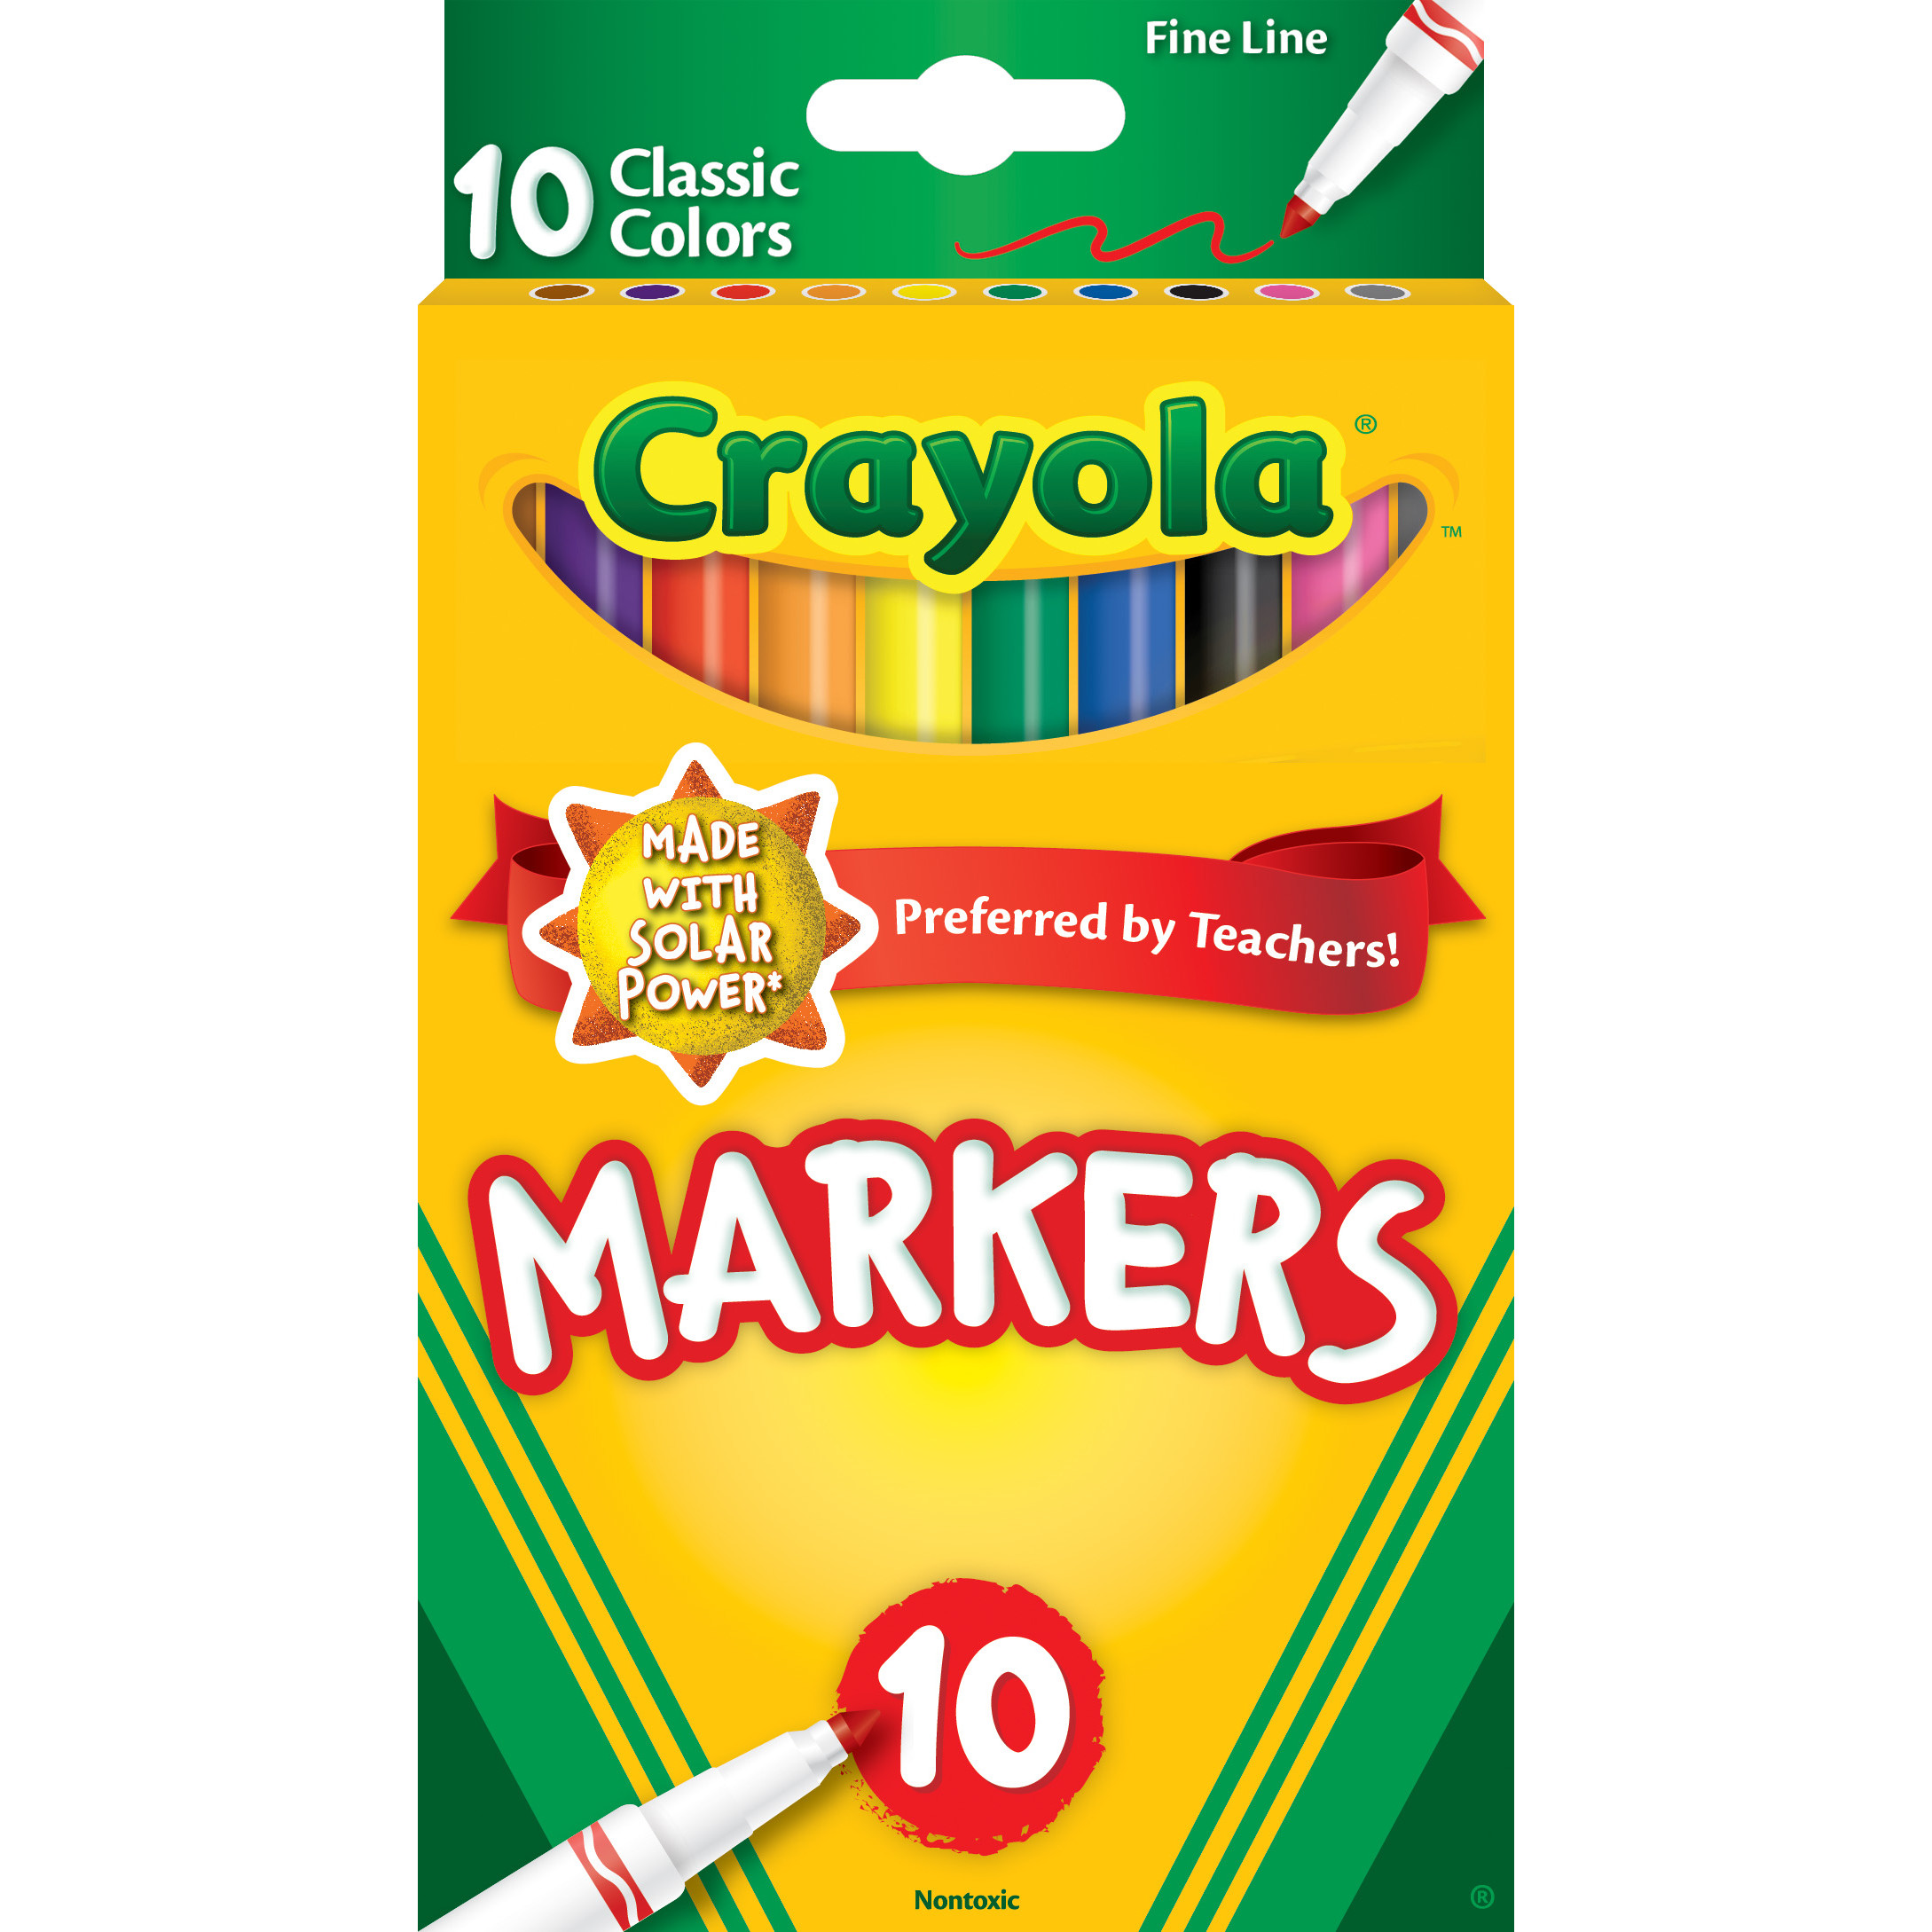 Crayola Classic Thin Line Marker Set, 10 Ct, Multi Colors, Back to School Supplies for Kids - image 1 of 9